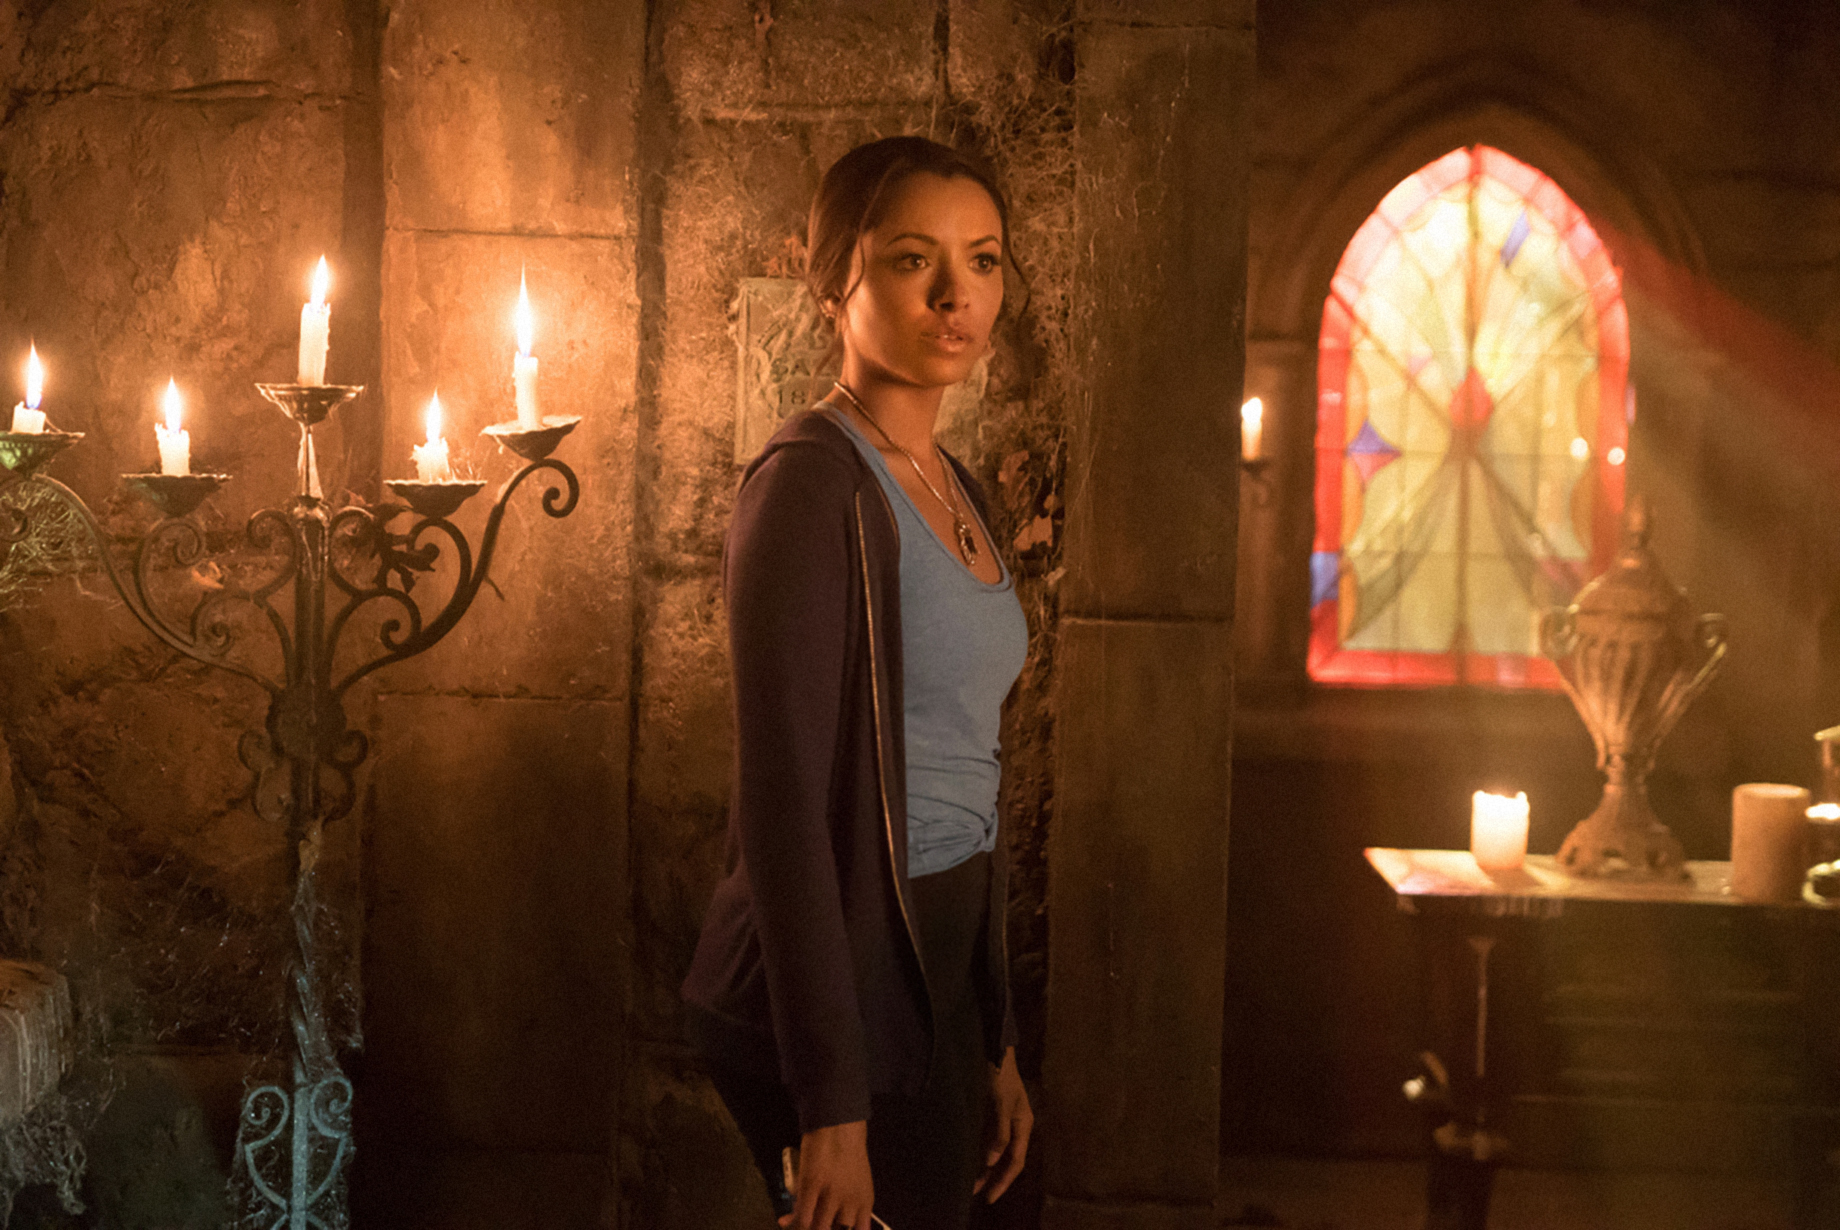 her character standing in a candlelit room